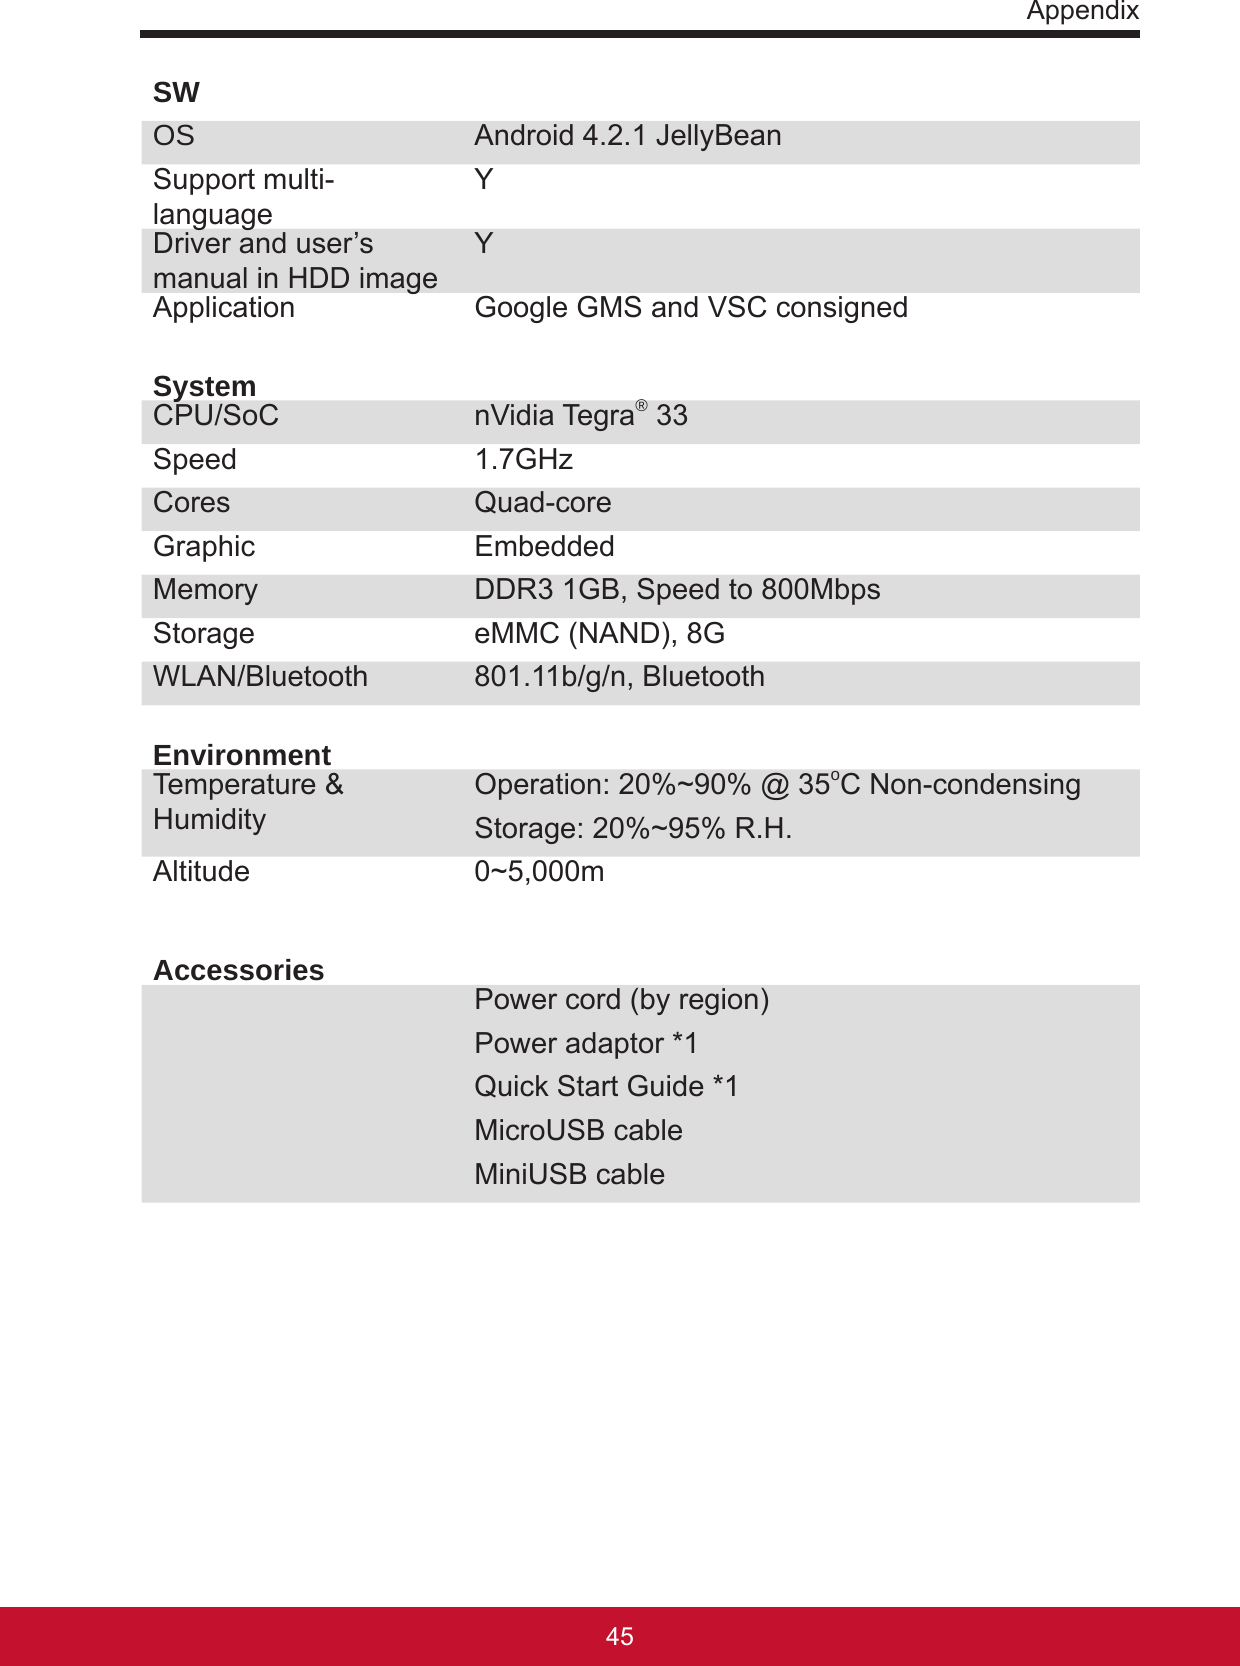 Appendix4544SWOS Android 4.2.1 JellyBeanSupport multi-language YDriver and user’s manual in HDD image YApplication  Google GMS and VSC consignedSystemCPU/SoC nVidia Tegra® 33Speed 1.7GHzCores Quad-coreGraphic EmbeddedMemory DDR3 1GB, Speed to 800MbpsStorage eMMC (NAND), 8GWLAN/Bluetooth 801.11b/g/n, BluetoothEnvironmentTemperature &amp; Humidity Operation: 20%~90% @ 35oC Non-condensing Storage: 20%~95% R.H.Altitude 0~5,000mAccessories Power cord (by region)Power adaptor *1Quick Start Guide *1MicroUSB cableMiniUSB cable